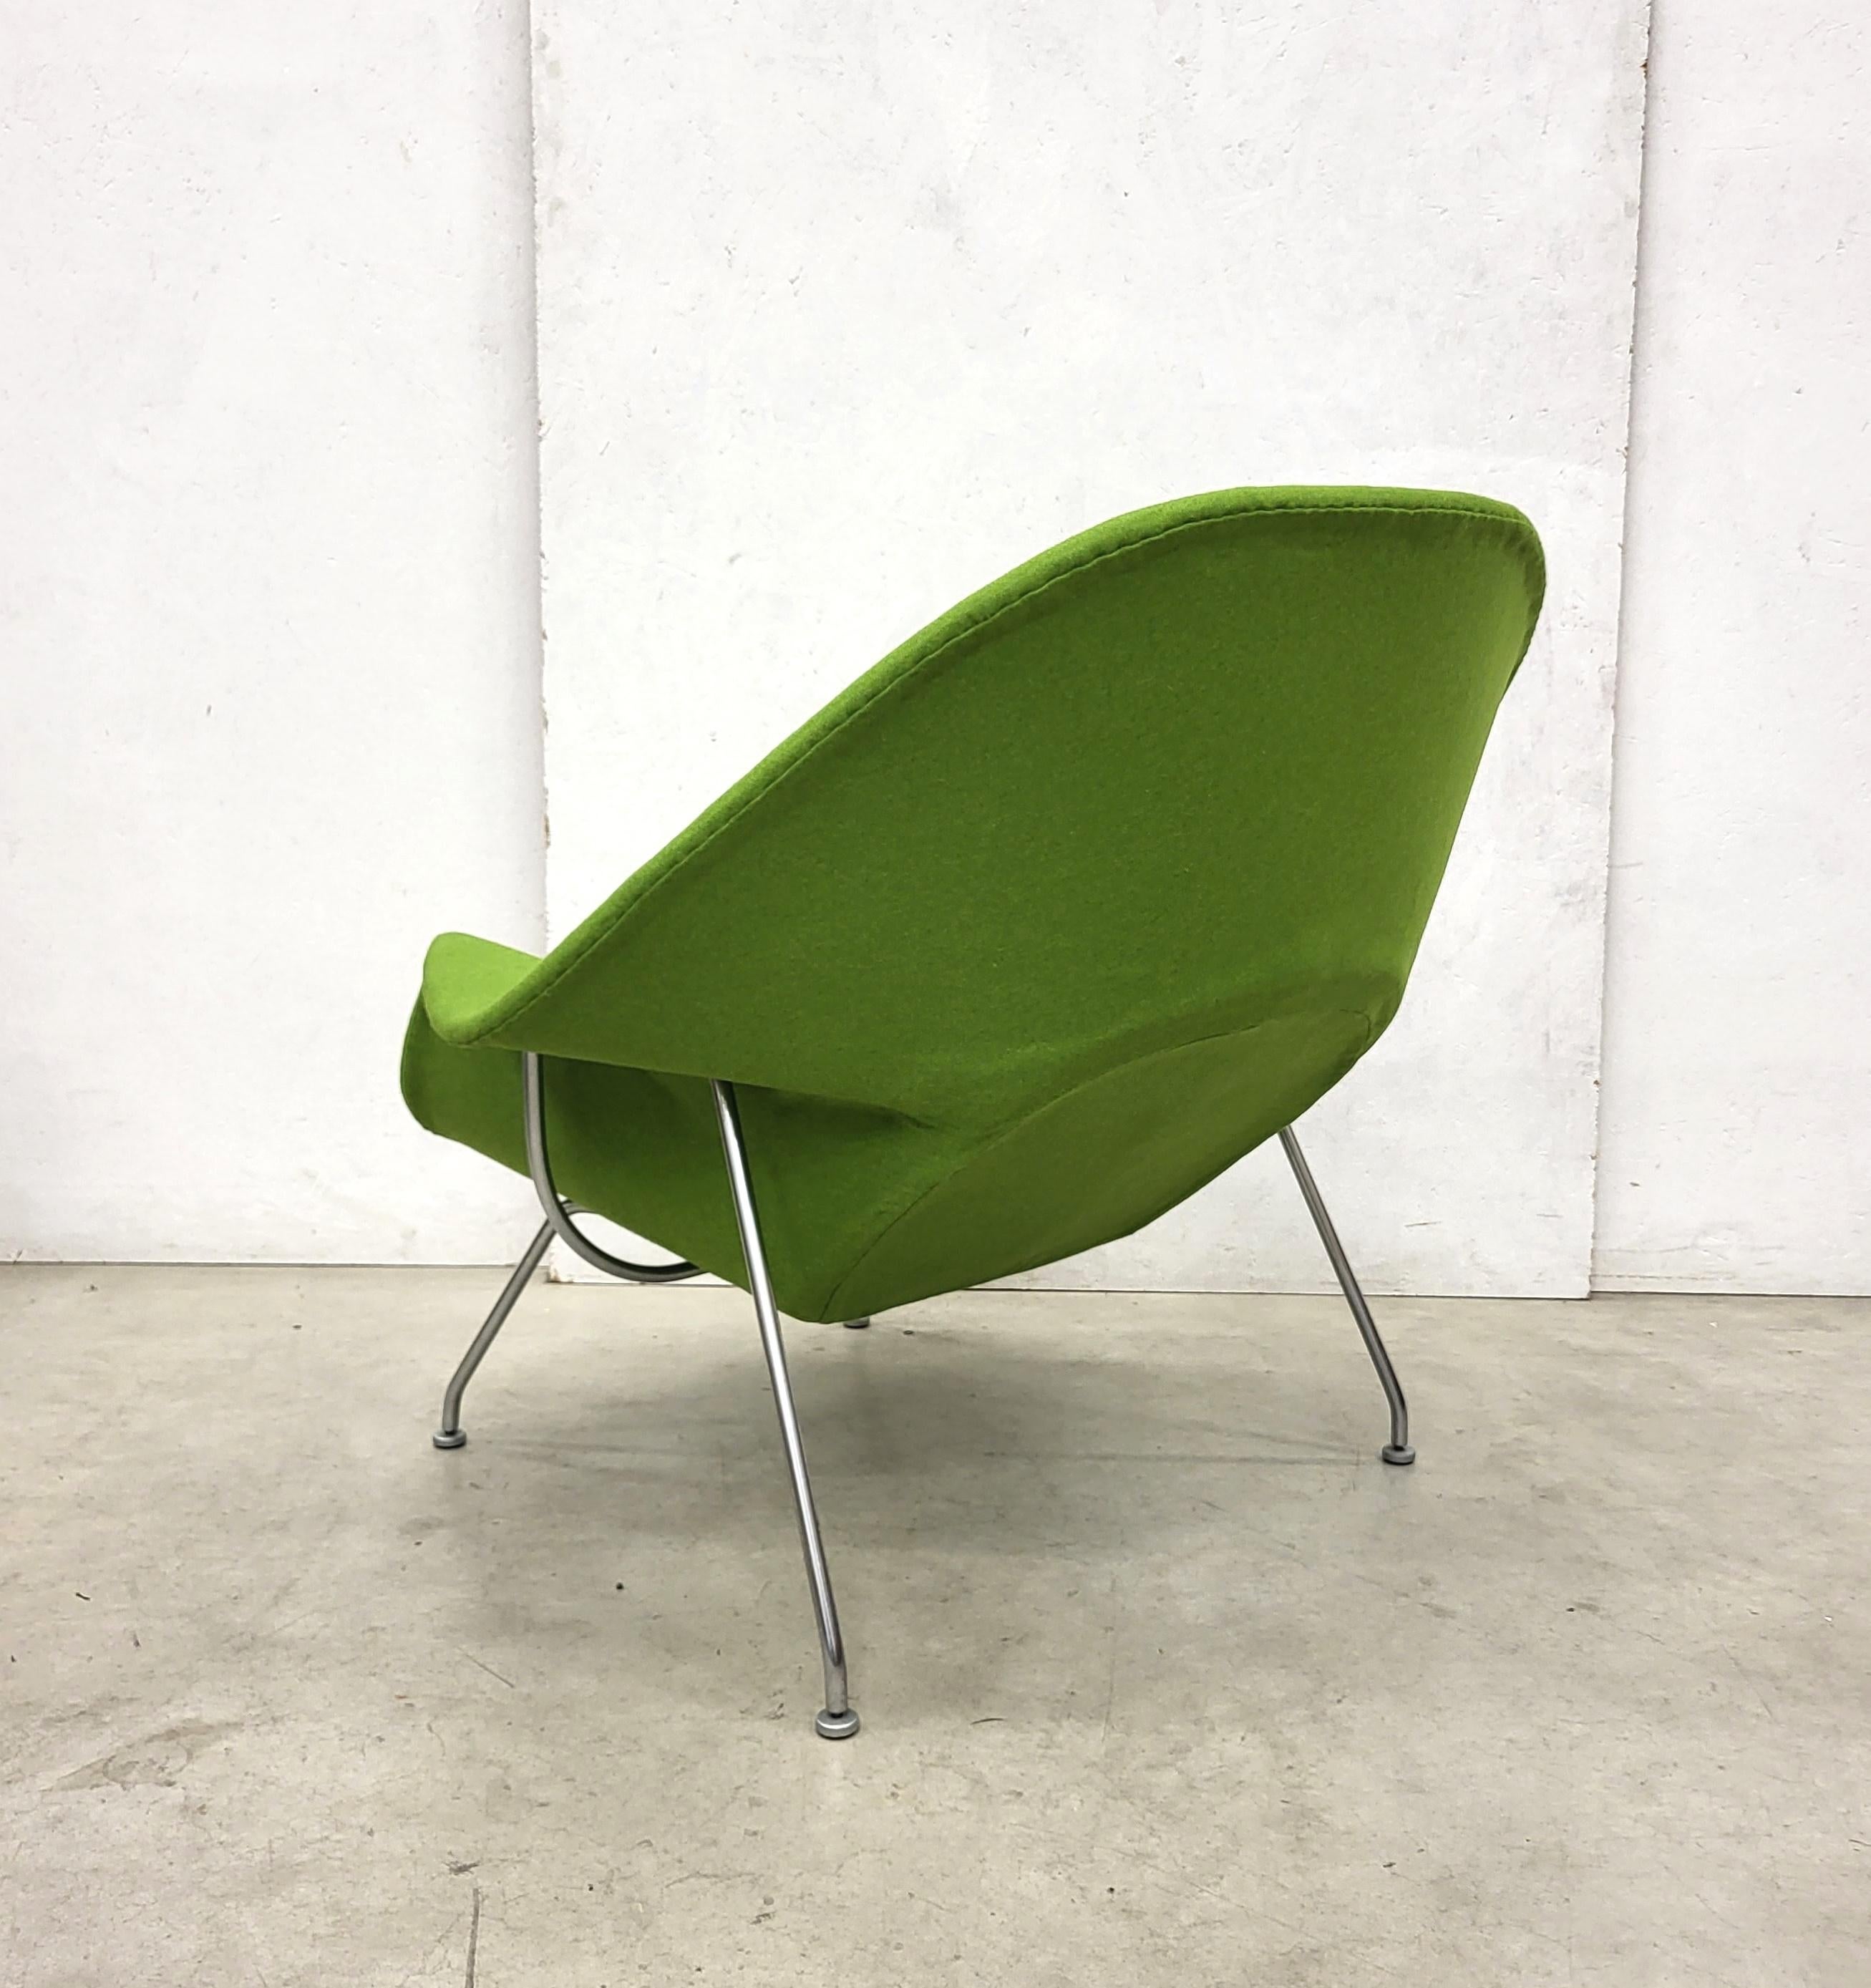 20th Century Woodgreen Womb Chair & Ottoman by Eero Saarinen for Knoll, 1960s For Sale